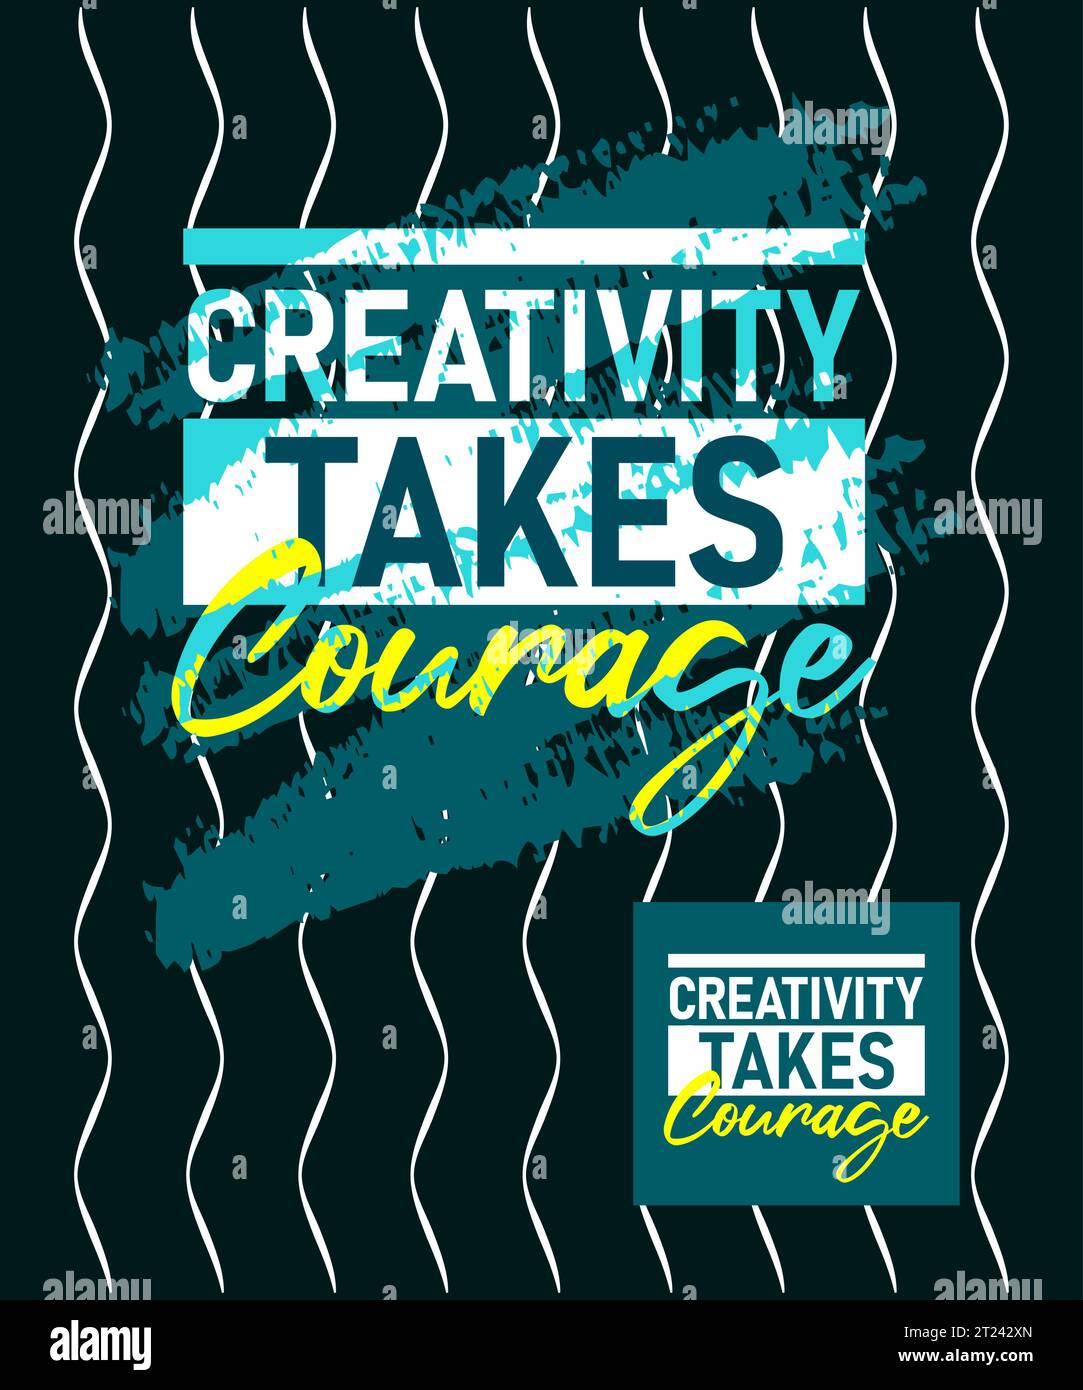 Creativity takes courage motivational stroke typepace design, Short phrases quotes, typography, slogan grunge, posters, labels, etc. Stock Vector